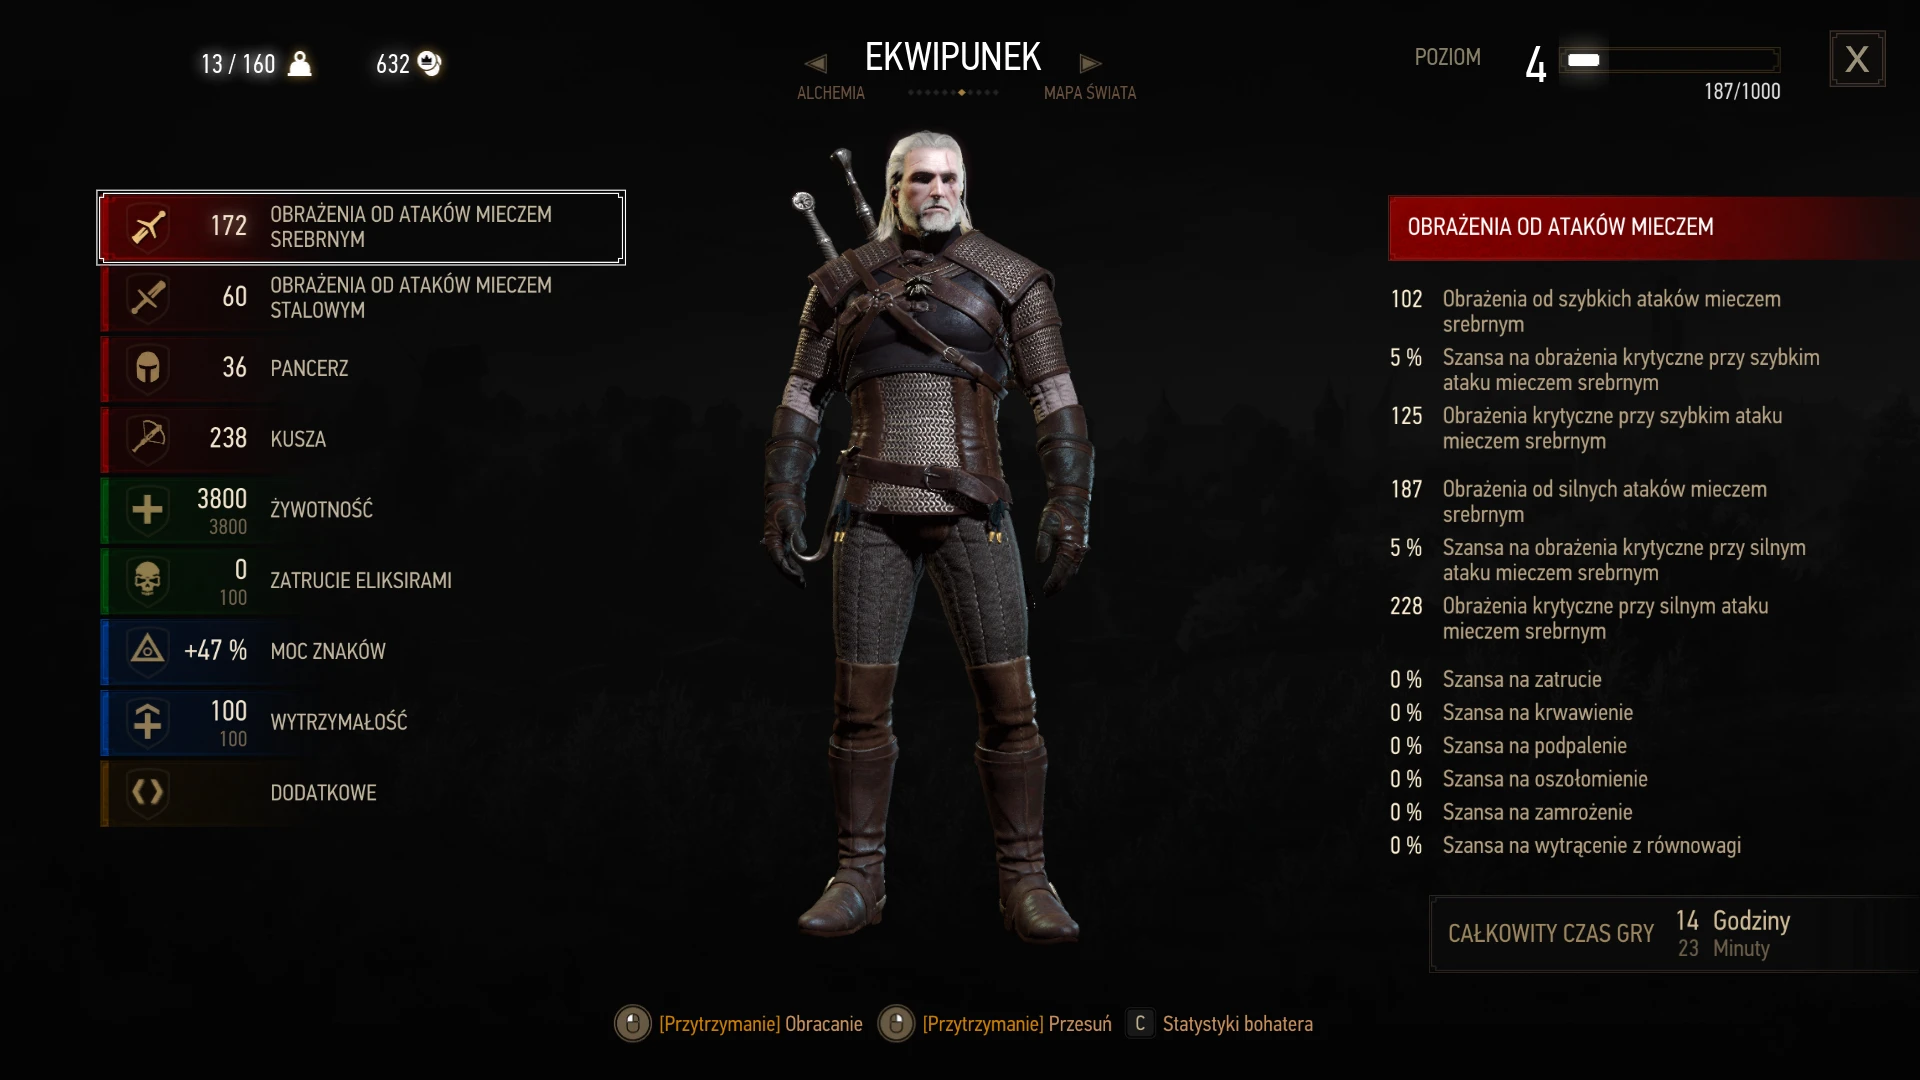 The witcher 3 console nexus фото 26